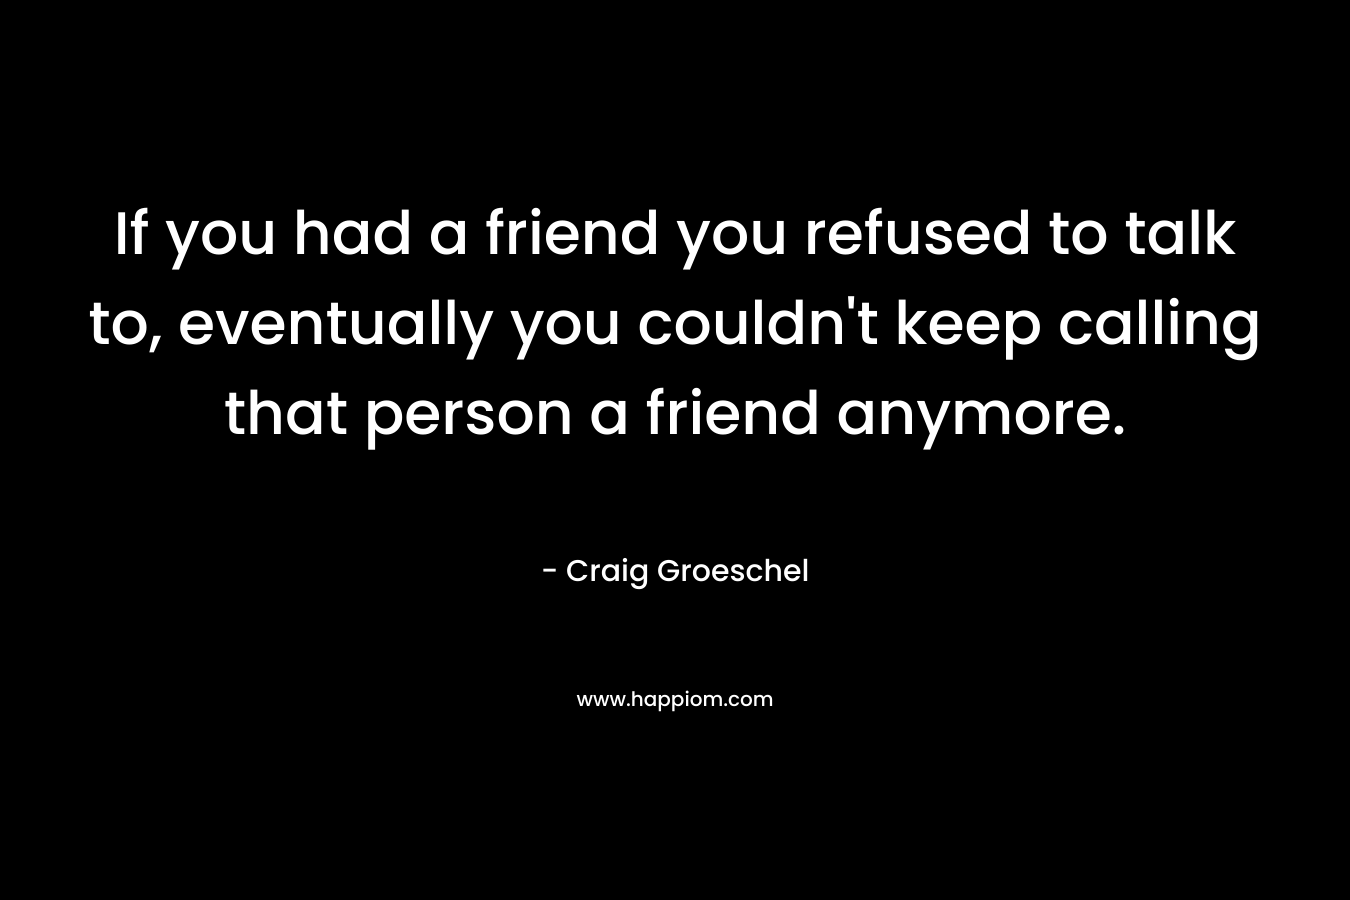 If you had a friend you refused to talk to, eventually you couldn’t keep calling that person a friend anymore. – Craig Groeschel